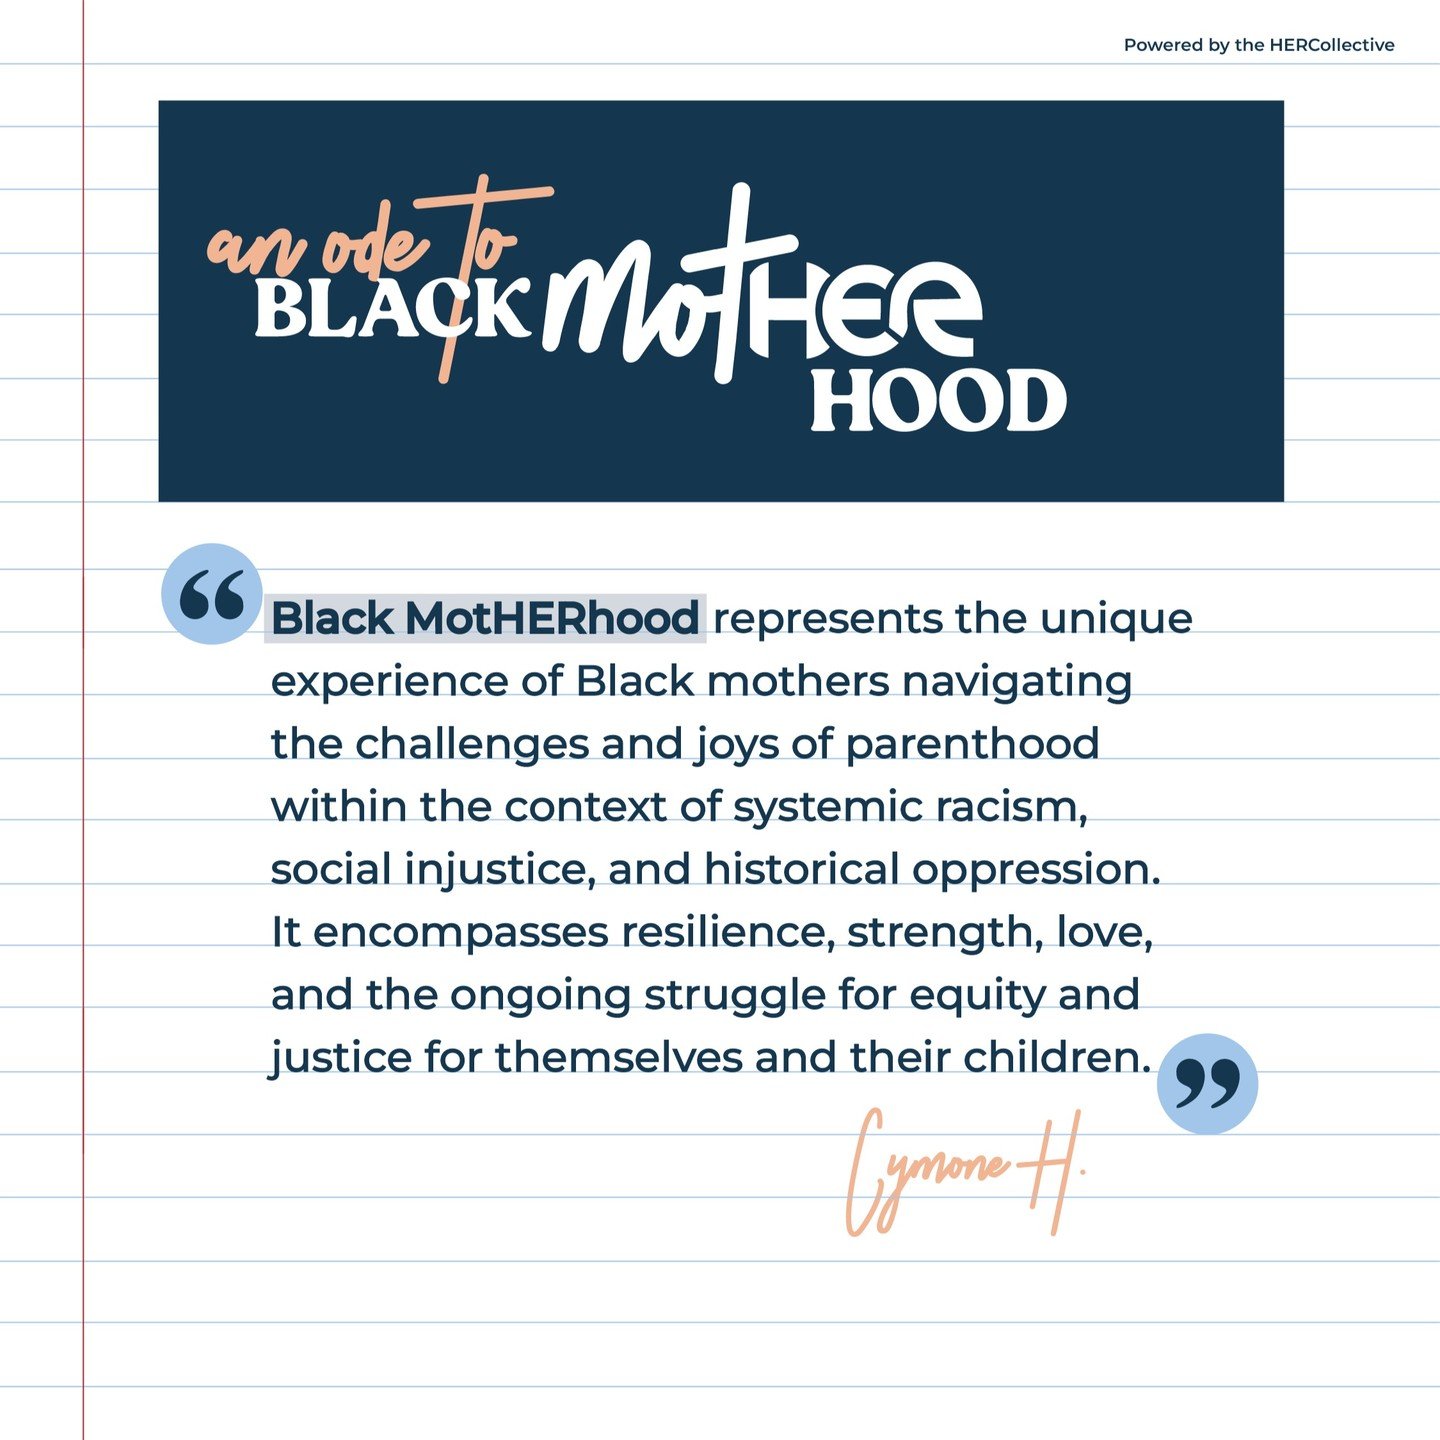 Honoring Black MotHERhood 💙

Today, we celebrate the profound journey of Black mothers everywhere, echoing the powerful words of Cymone H. ✨ 

From the depths of historical oppression to the heights of resilience and love, Black MotHERhood embodies 